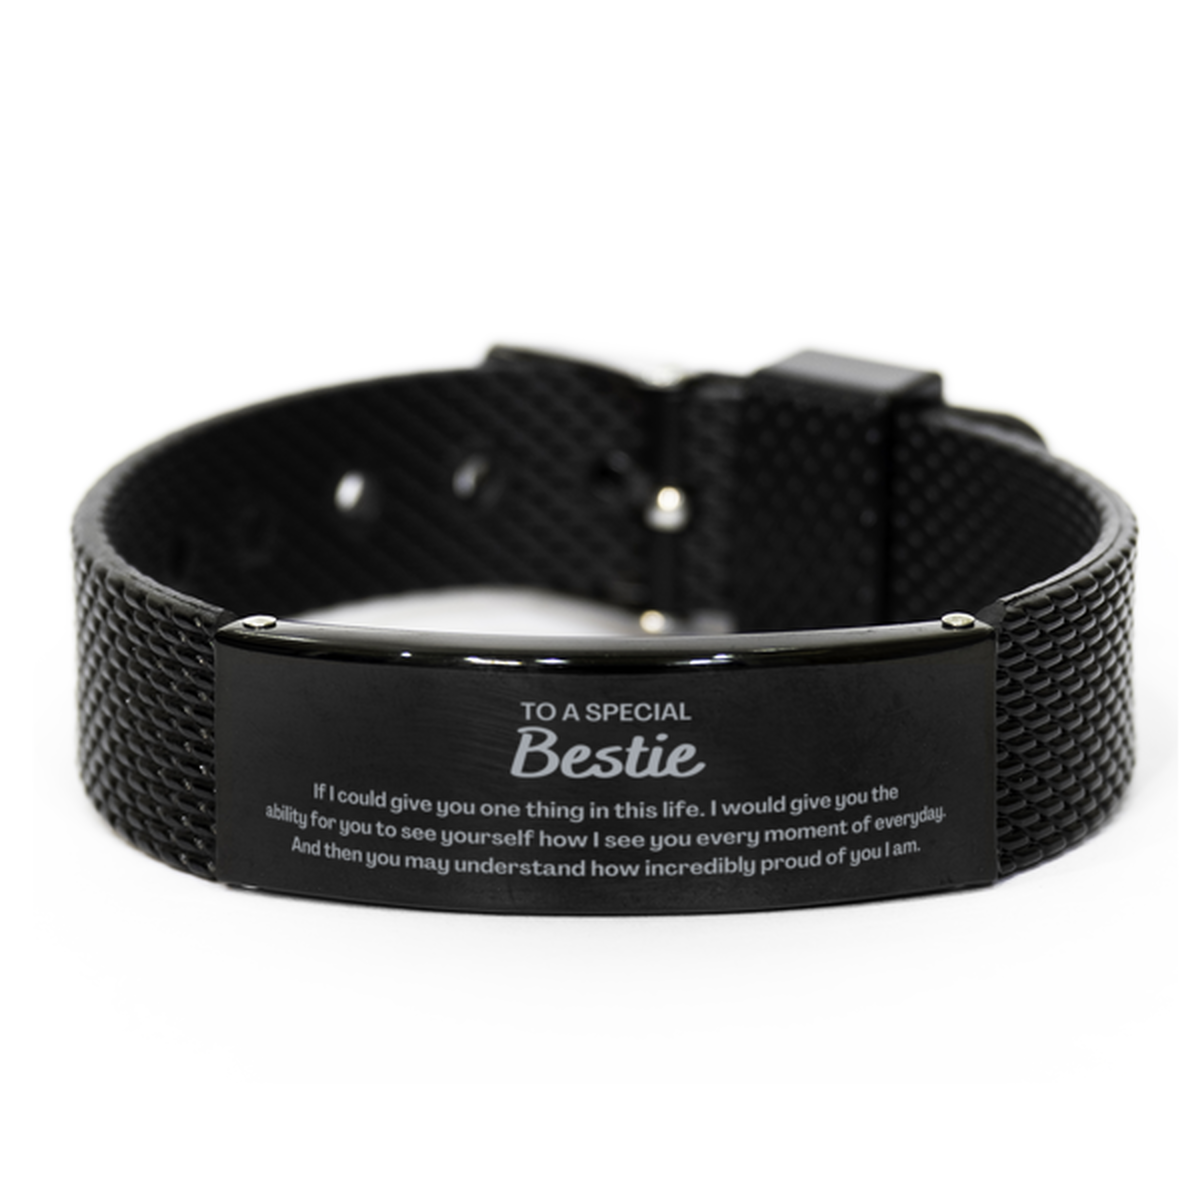 To My Bestie Black Shark Mesh Bracelet, Gifts For Bestie Engraved, Inspirational Gifts for Christmas Birthday, Epic Gifts for Bestie To A Special Bestie how incredibly proud of you I am